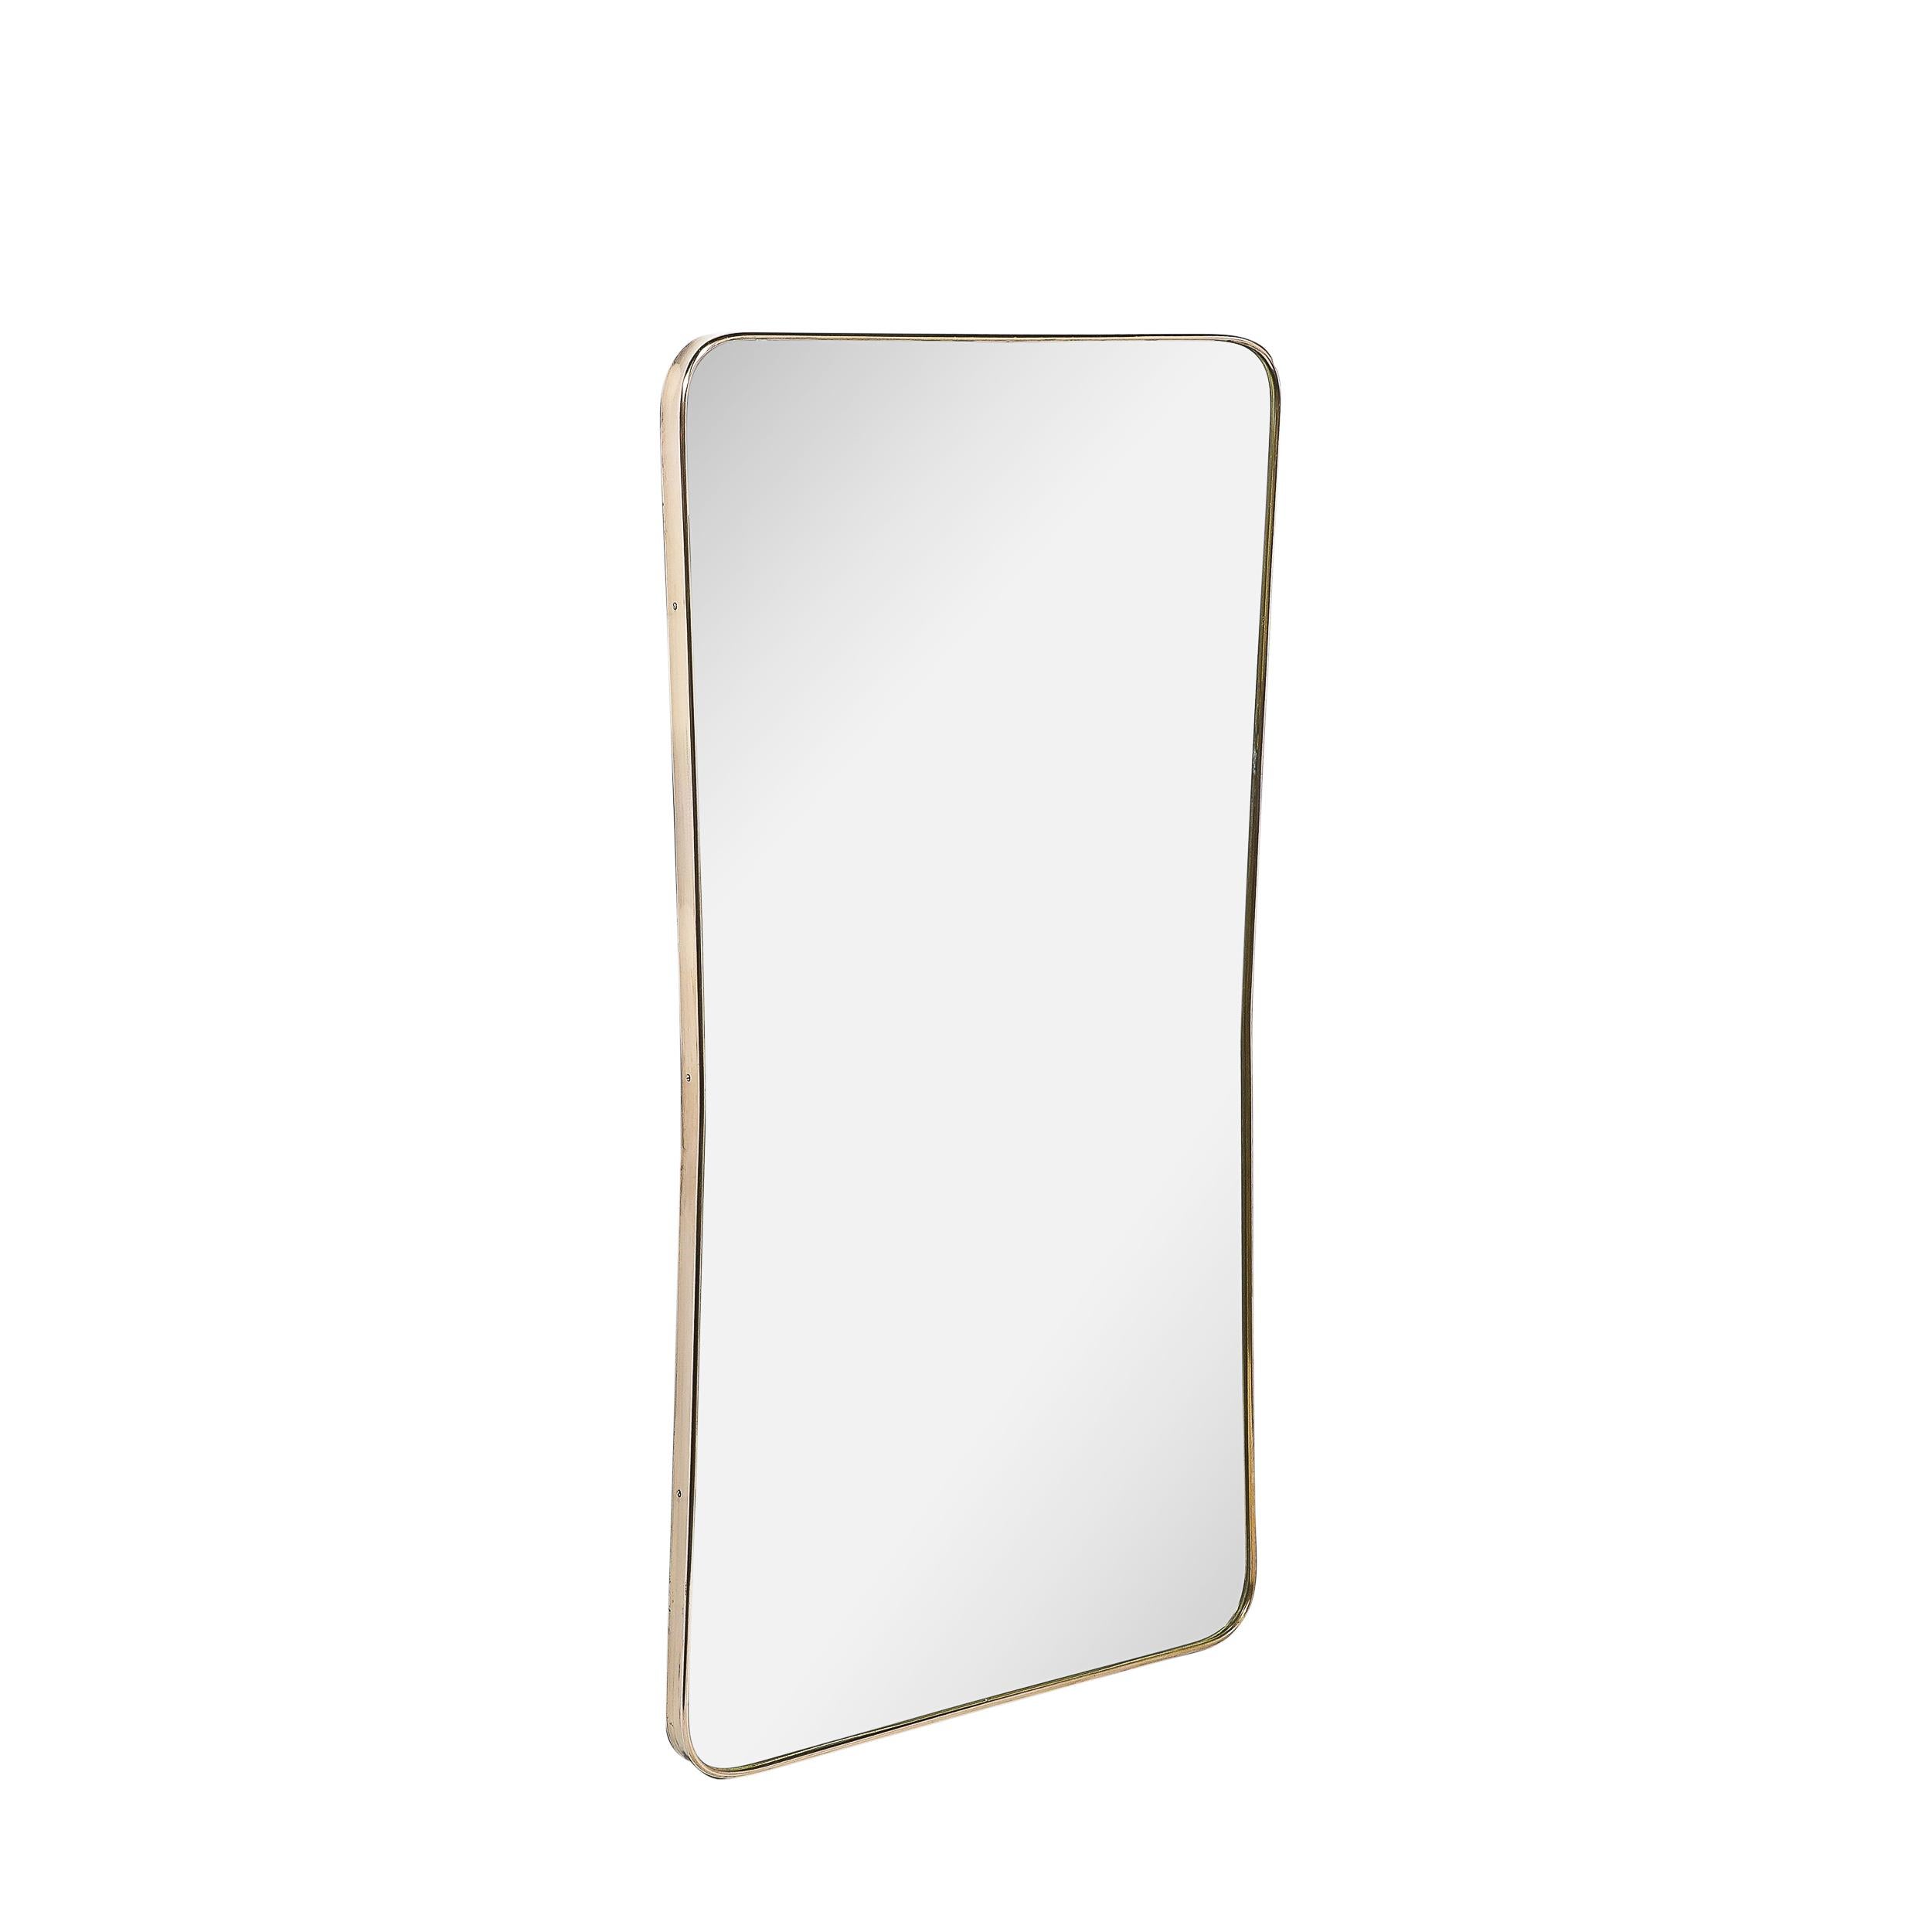 This minimal and beautifully made Mid-Century Modernist Tapered Rectangular Brass Wrapped Mirror originates from Italy, Circa 1960. Features a lovely silhouette of polished brass, subtly curved along the front edge as it hugs the mirror panel.